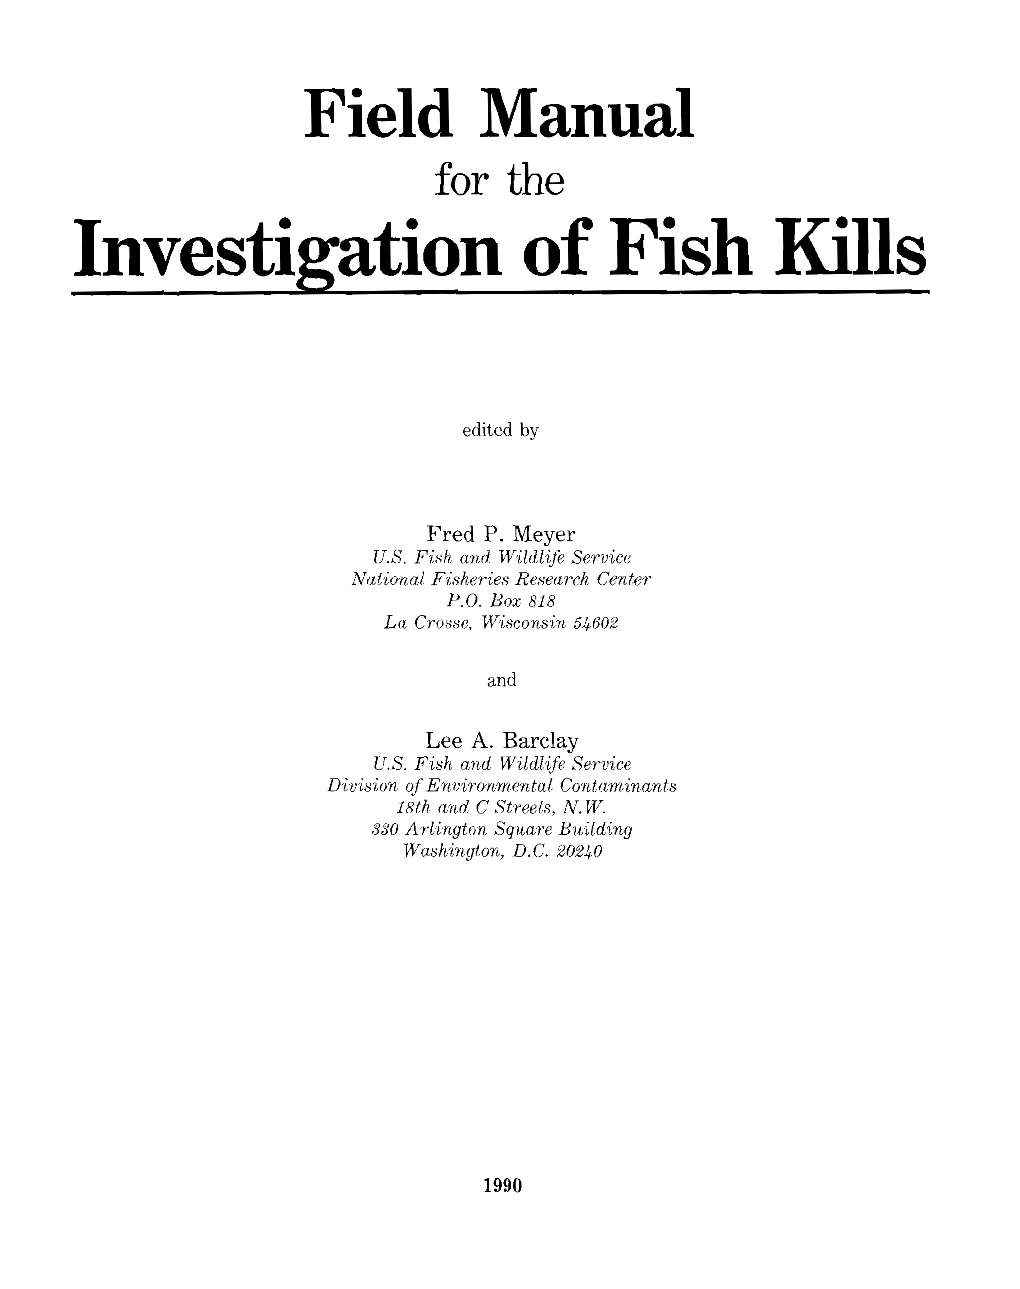 Field Manual for the Investigation of Fish Kills